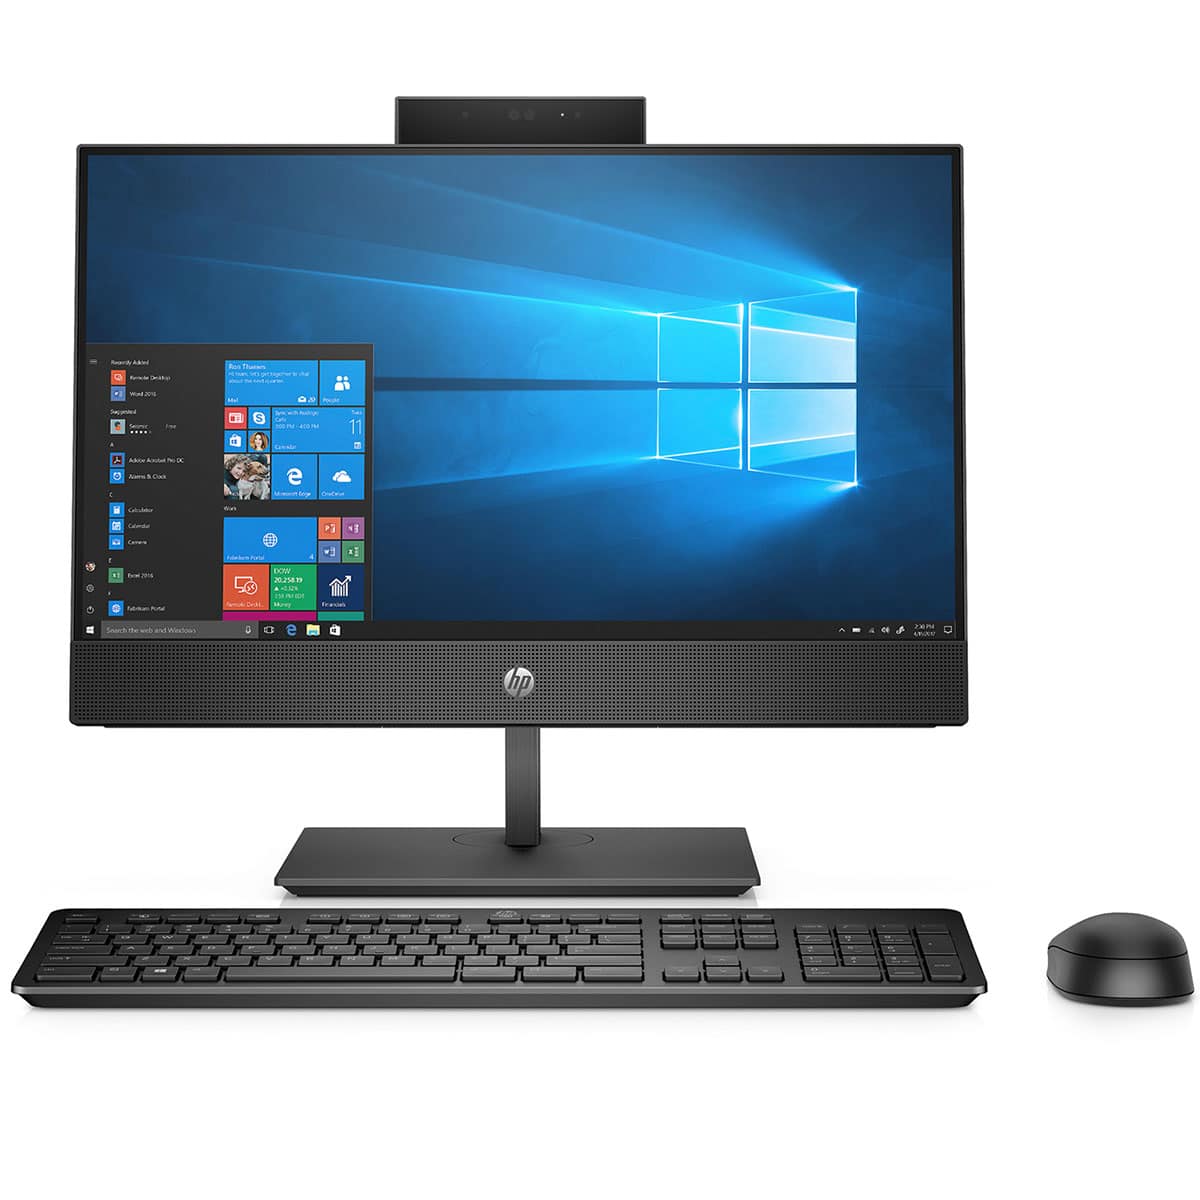 Best Buy: HP ProDesk 600 G5 Small Form Factor PC 16 GB Memory 256